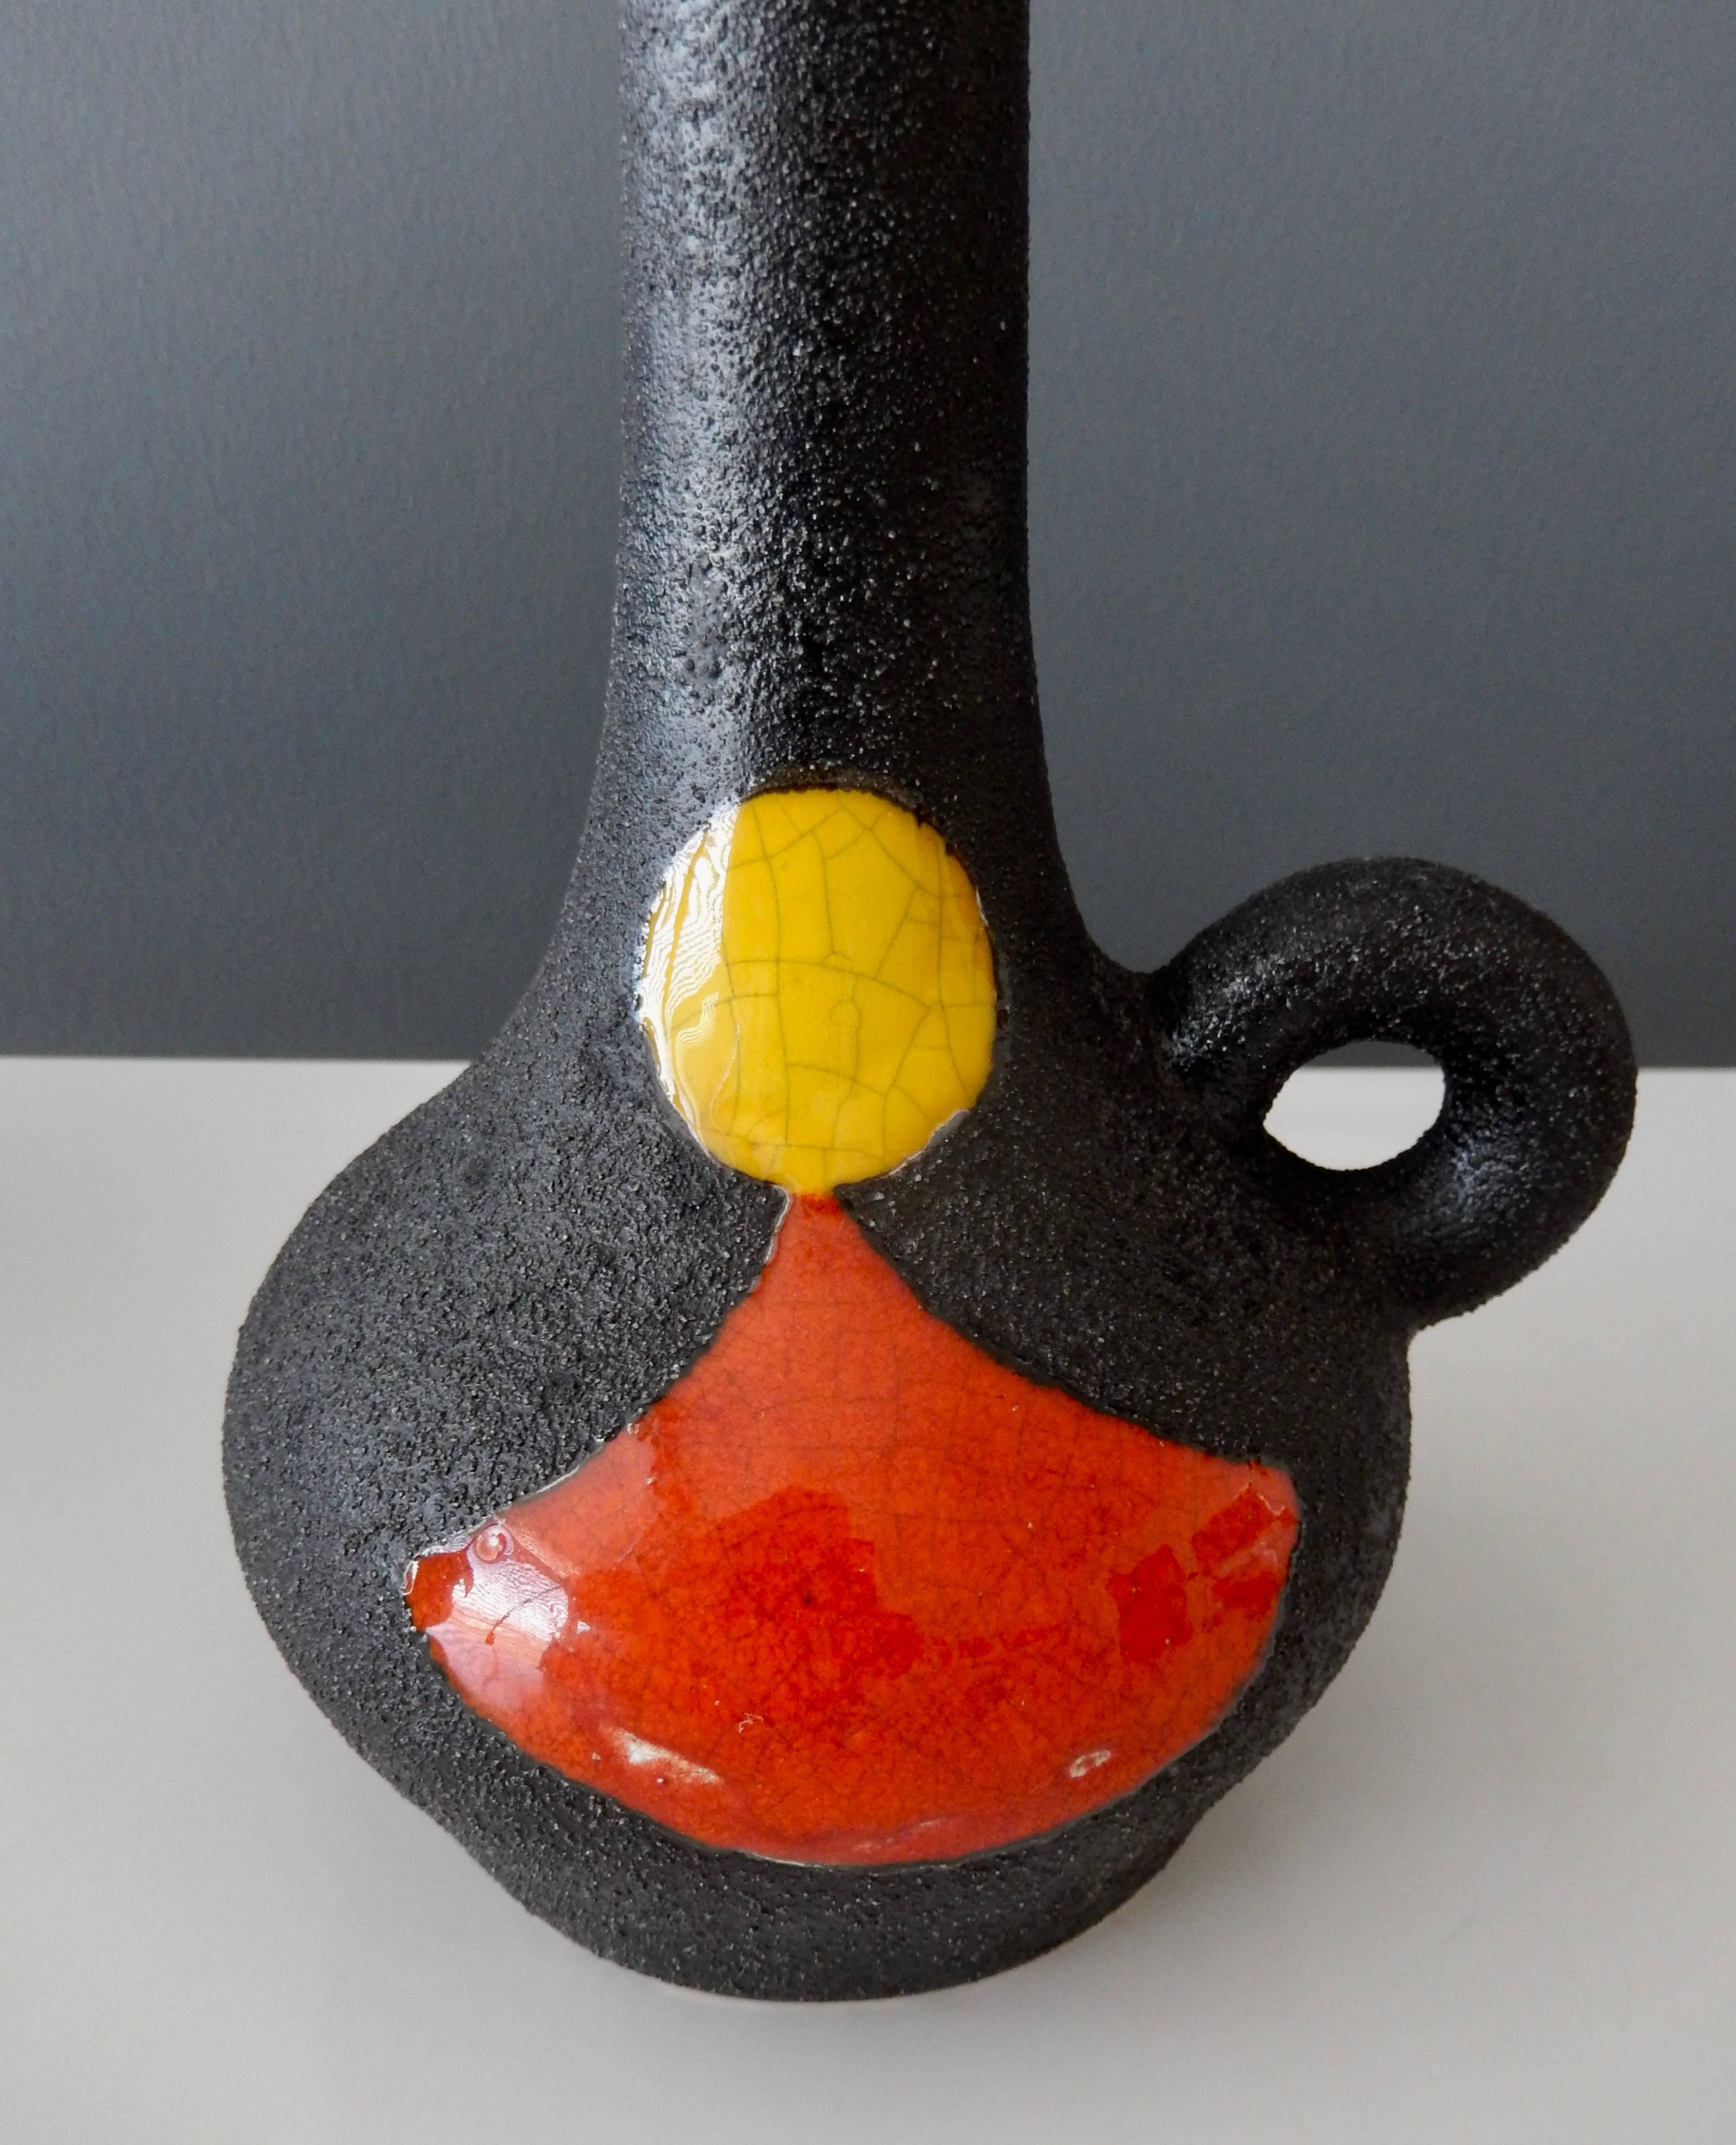 A two-color, glazed earthenware vase by the French ceramic artist Gilbert Valentin (1928-2001) with a modernist design. A master of glazes, Valentin uses striking canary yellow and burnt orange glazes against a gritty black ground to combine a